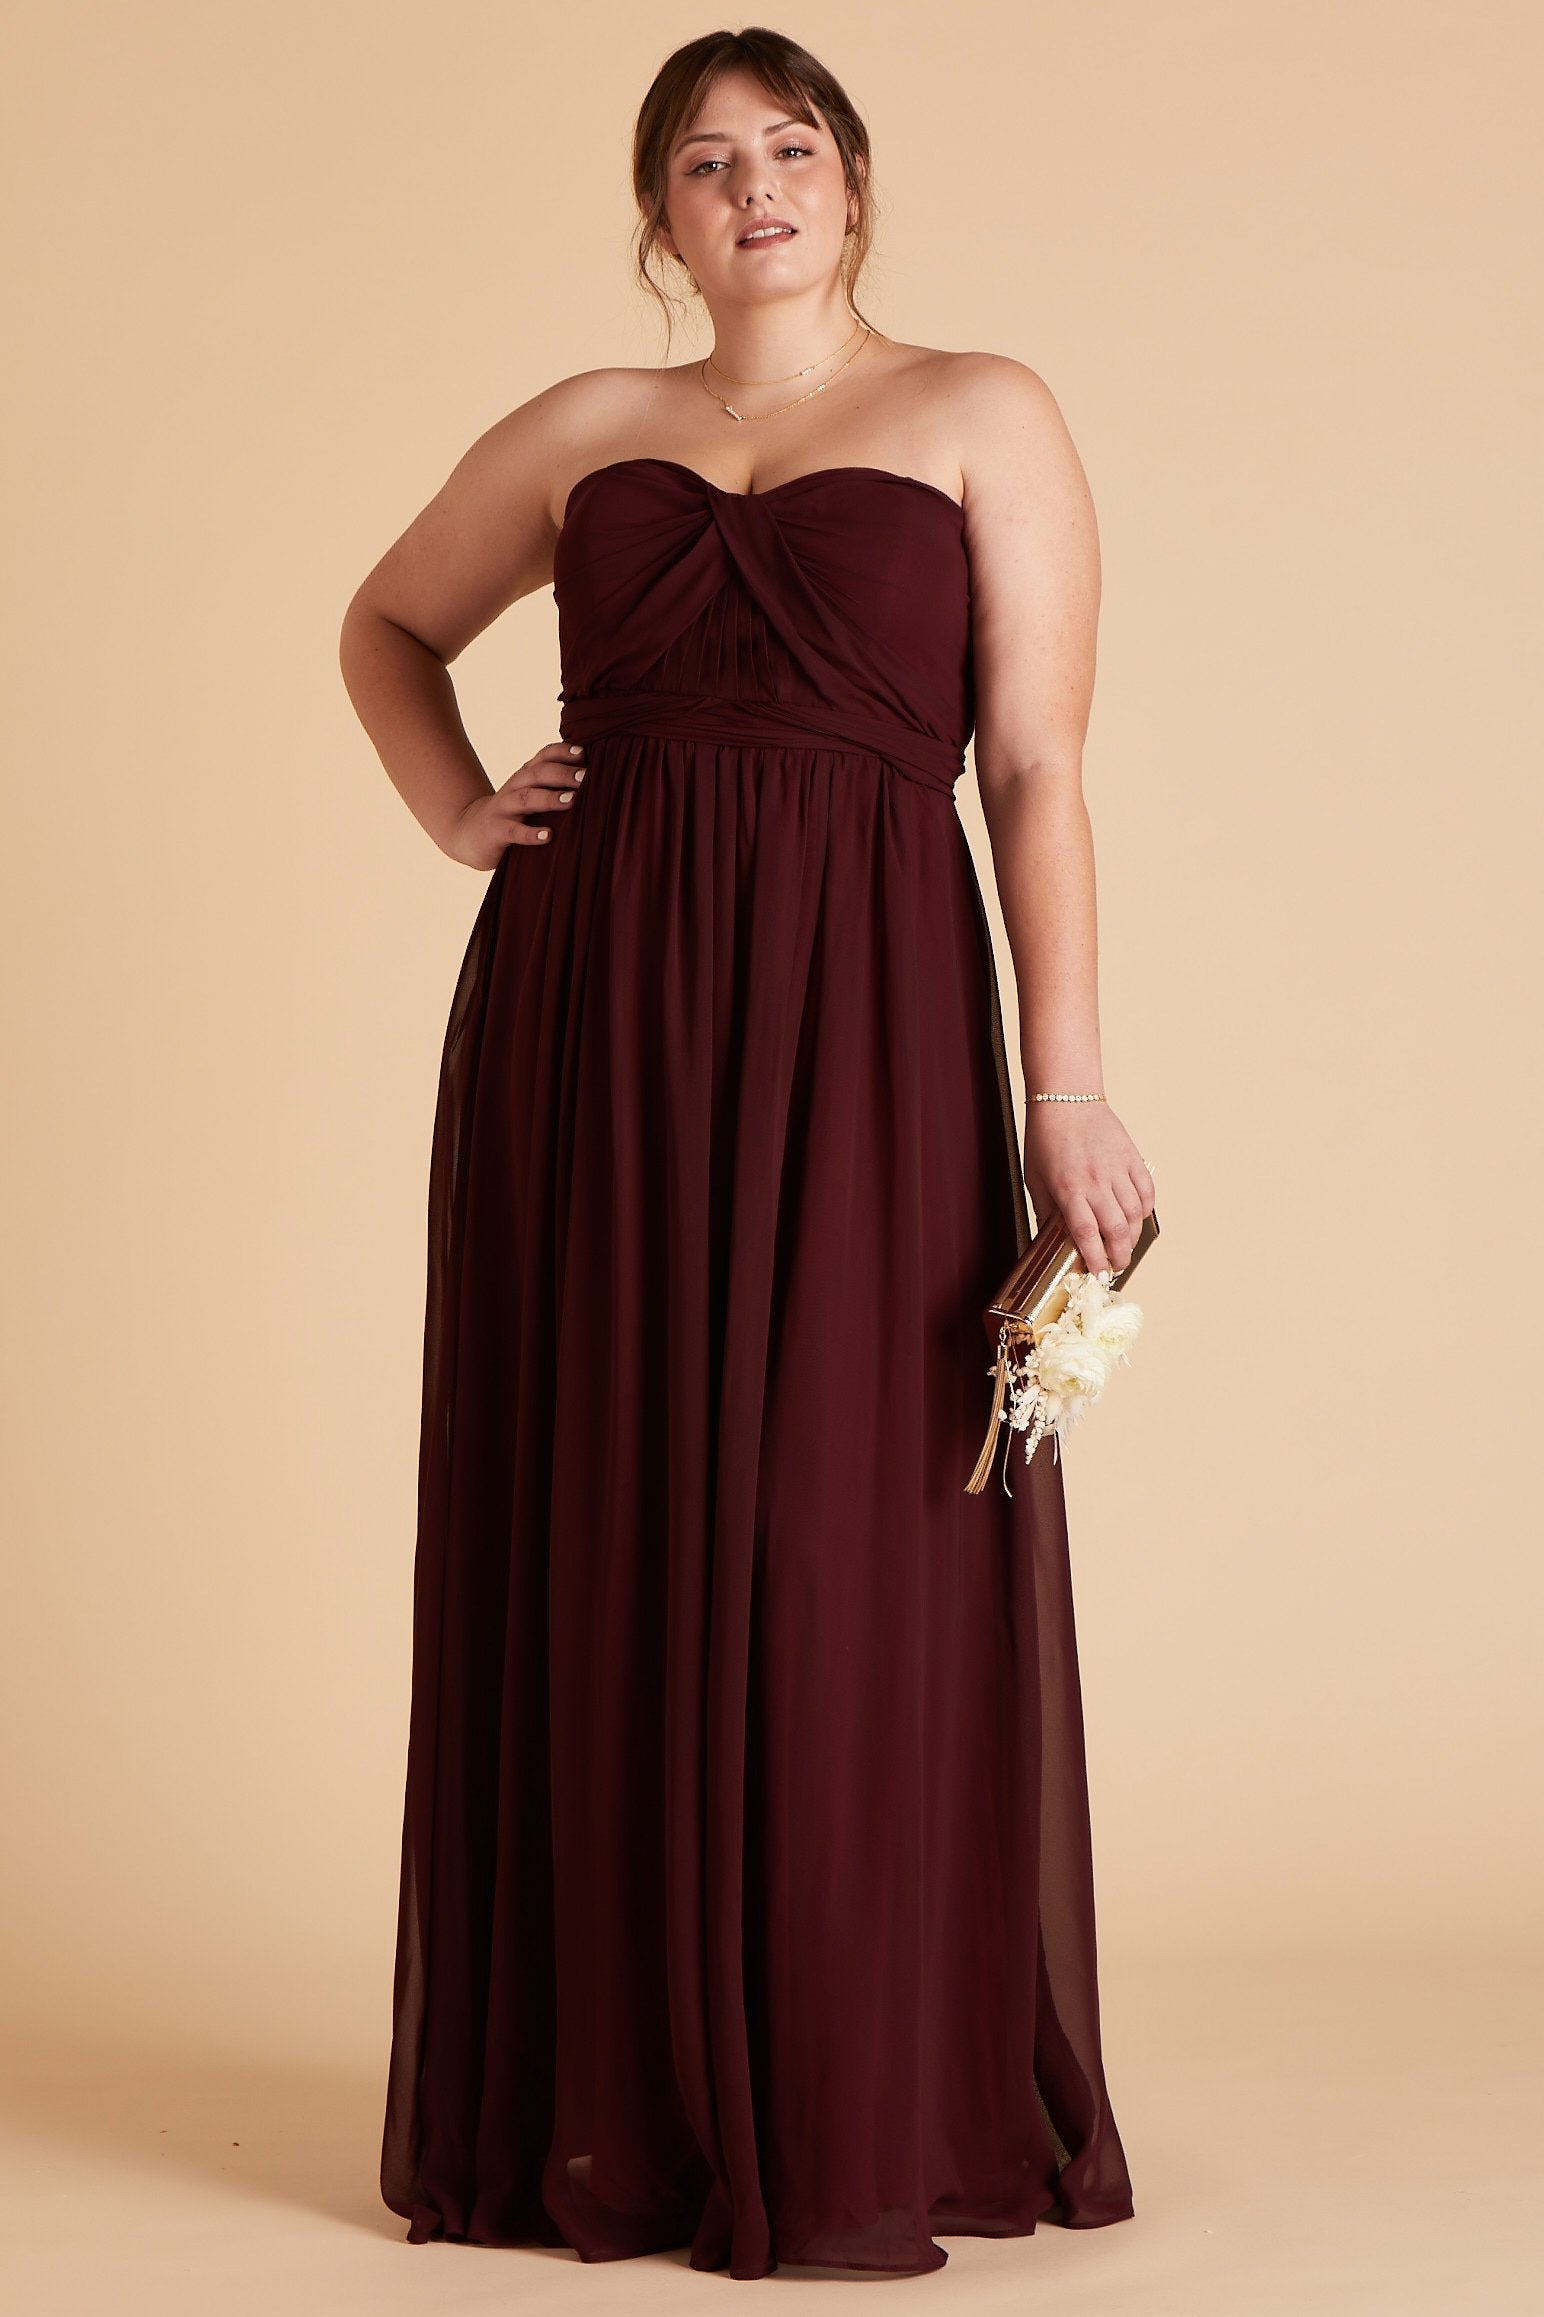 Grace convertible plus size bridesmaid dress in cabernet burgundy chiffon by Birdy Grey, front view